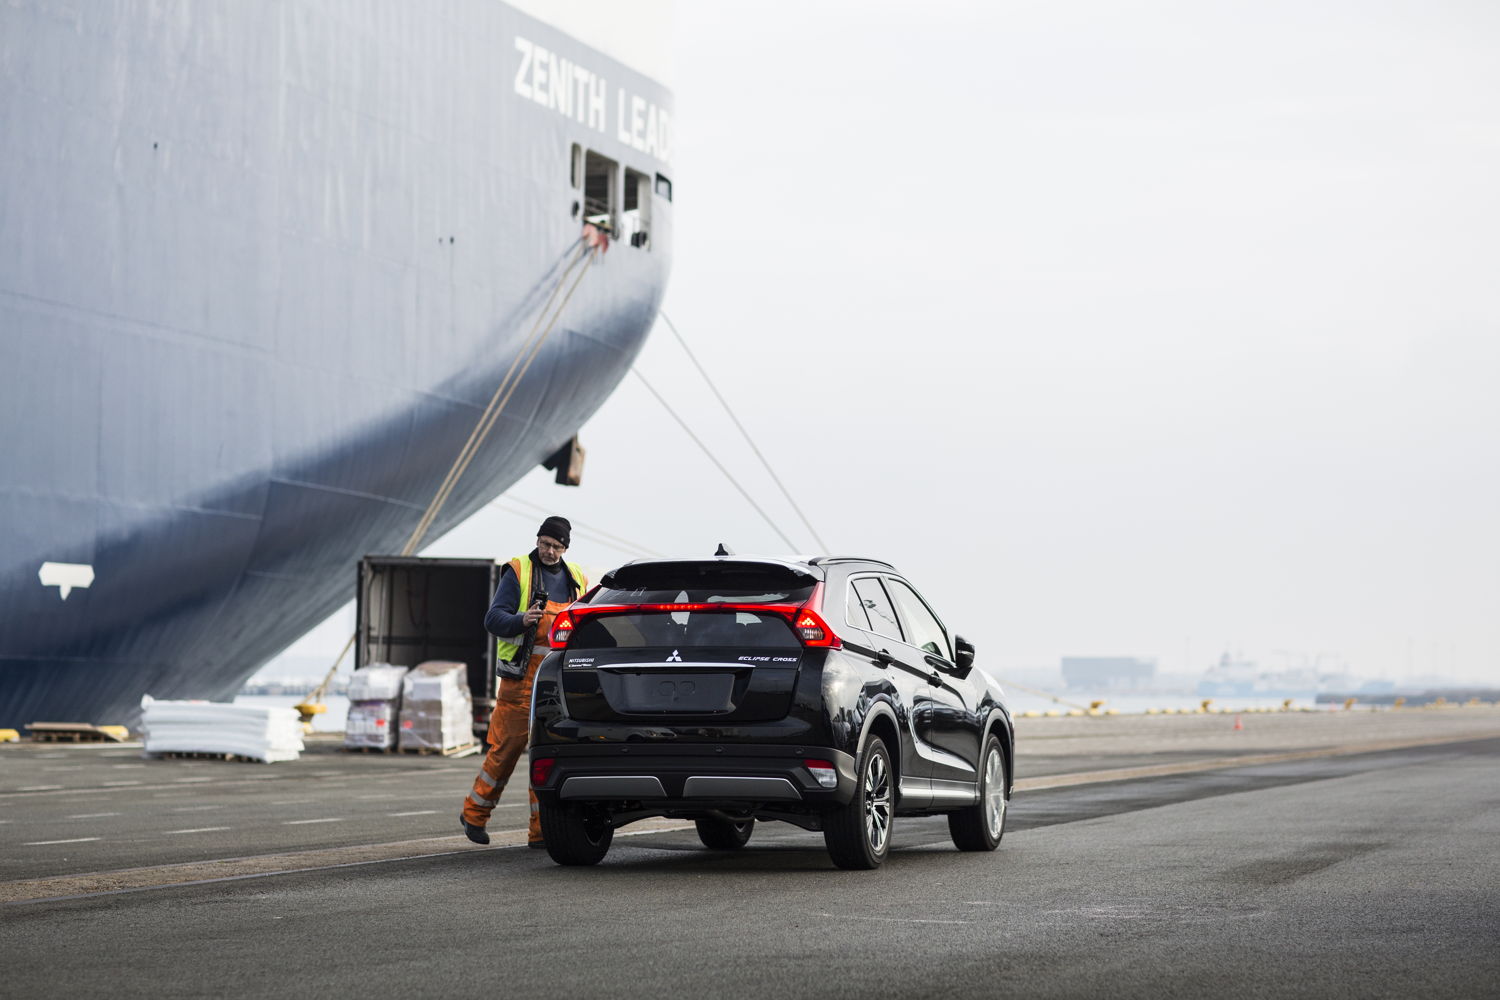 Eclipse Cross Arrival in the Port